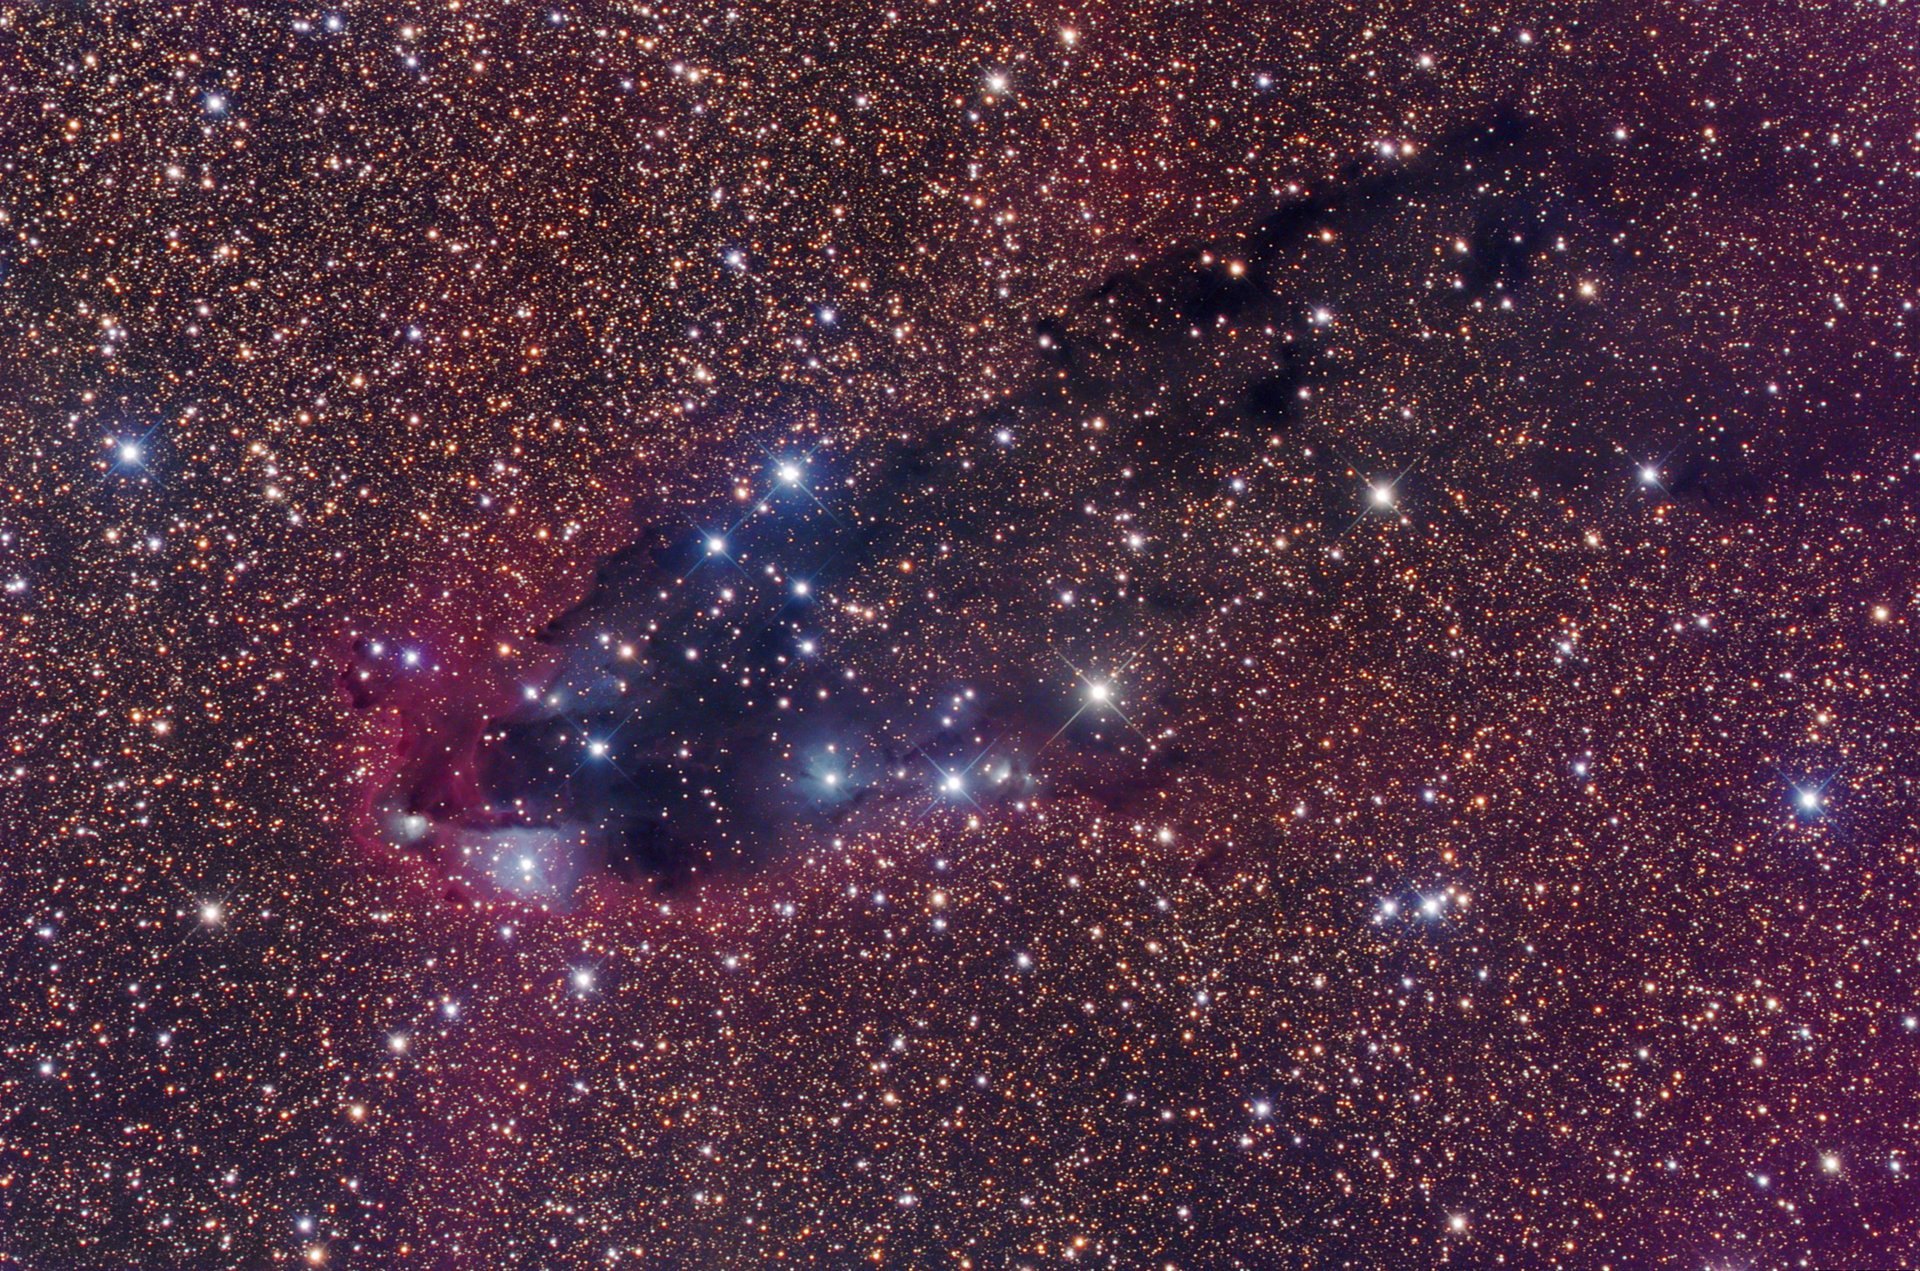 The Dark nebula of outer space